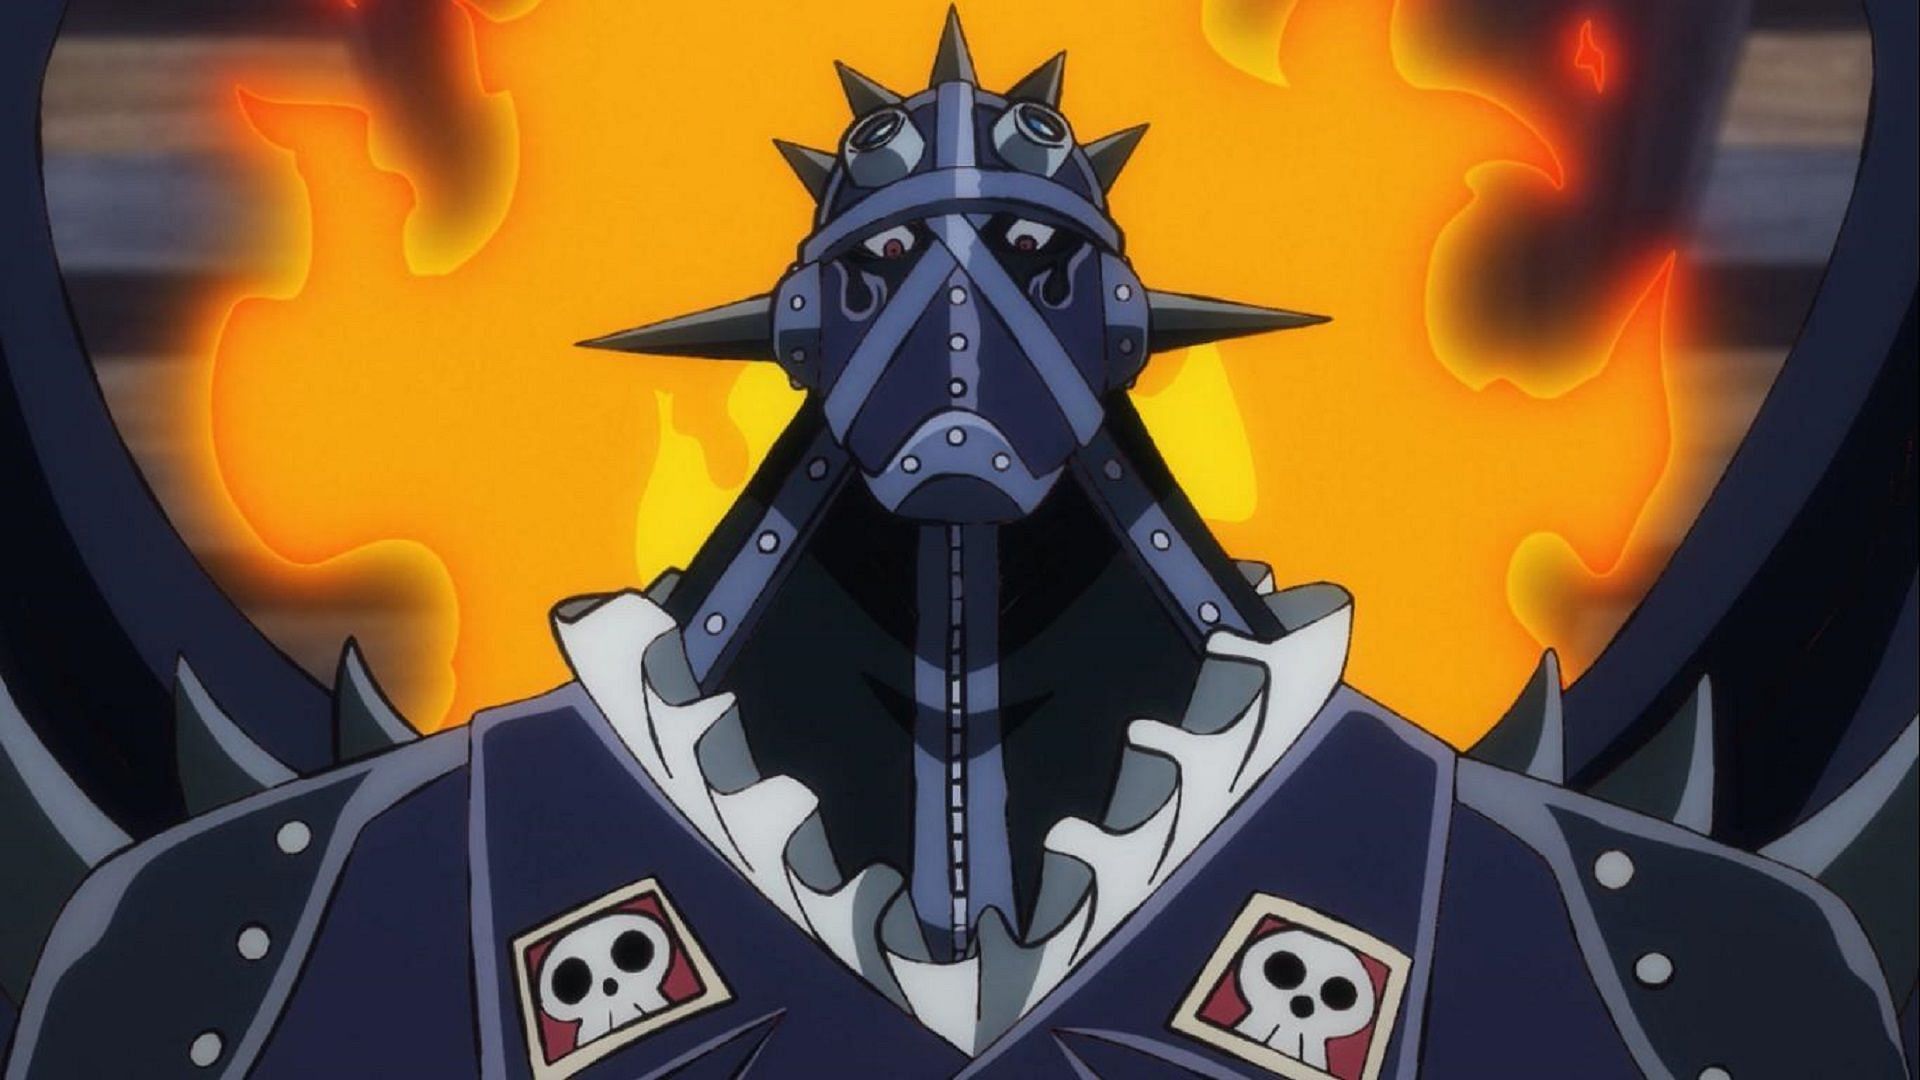 King as seen in One Piece (Image via Toei Animation, One Piece)